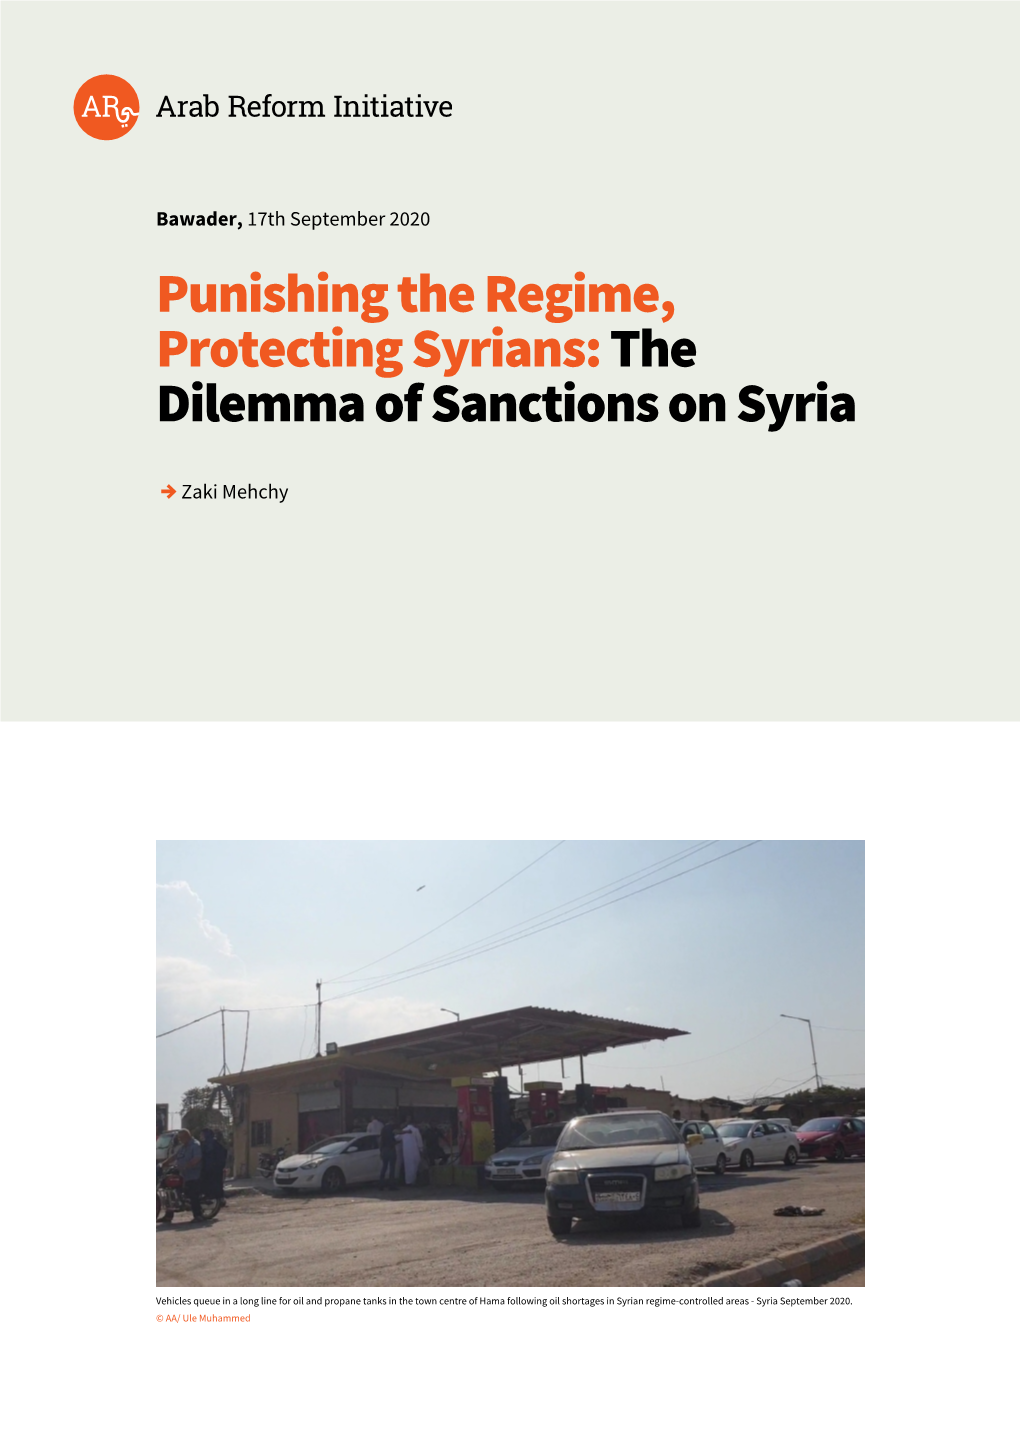 Punishing the Regime, Protecting Syrians: the Dilemma of Sanctions on Syria